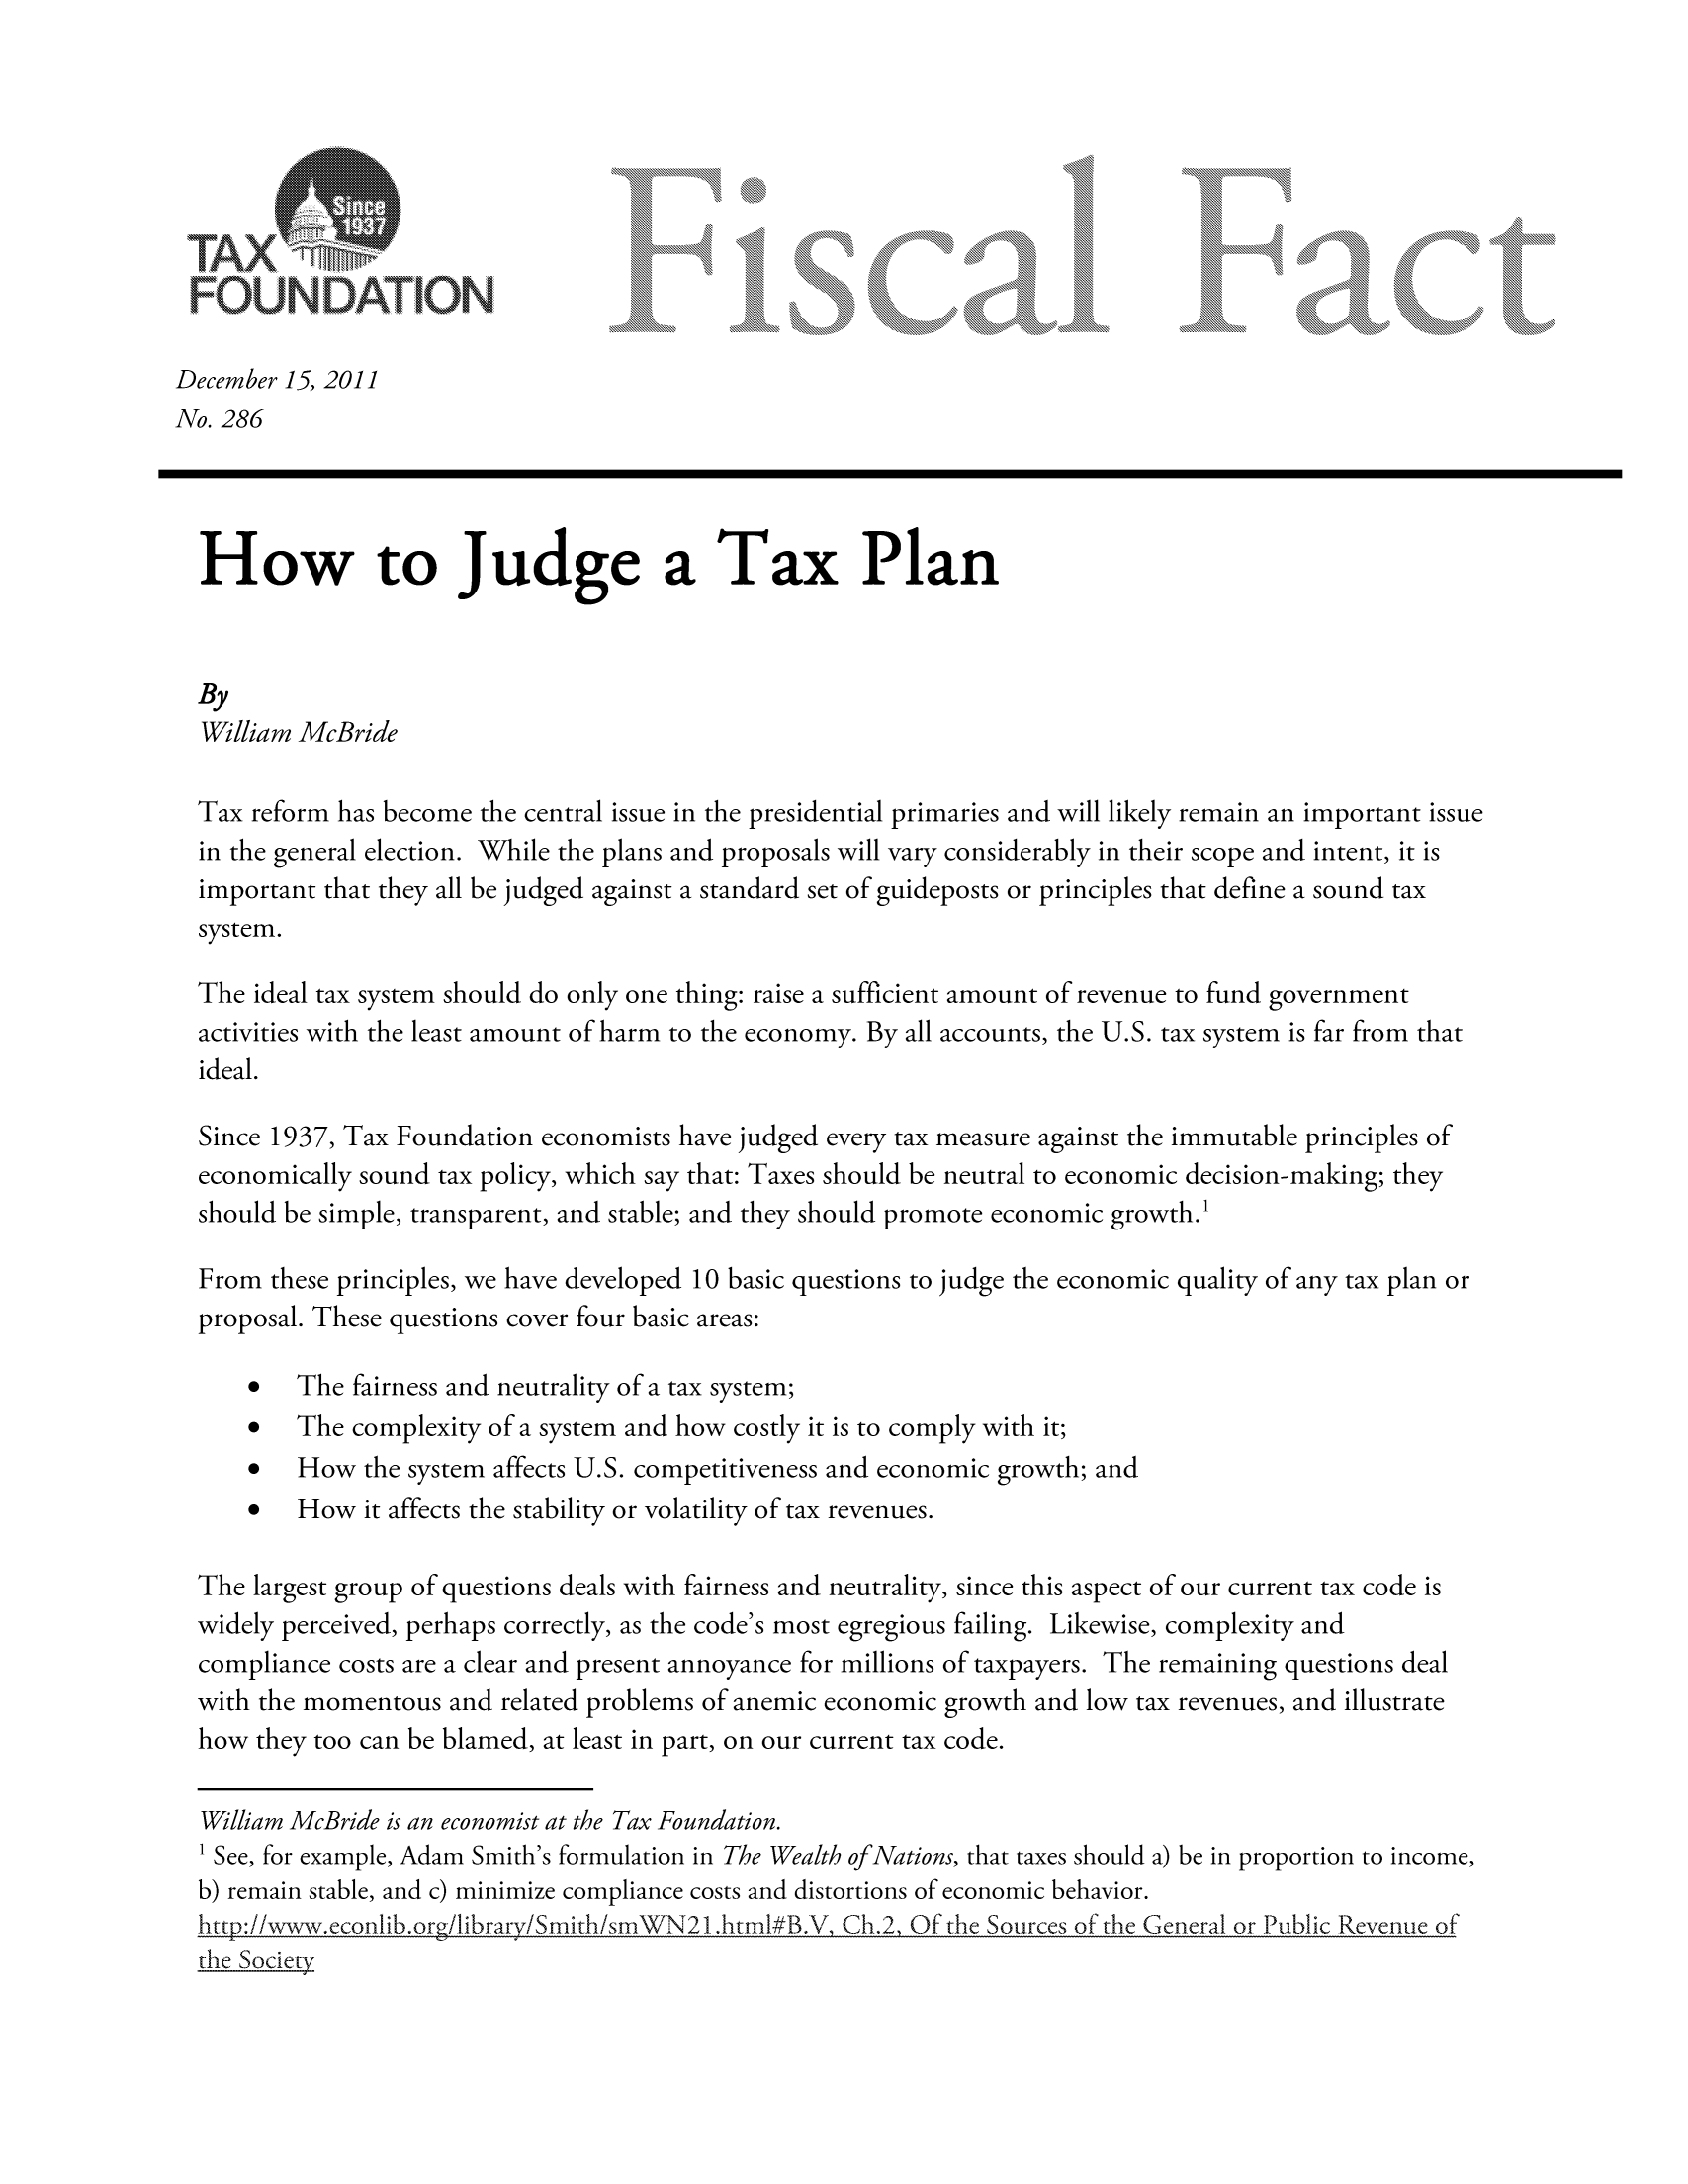 handle is hein.taxfoundation/ffcigxz0001 and id is 1 raw text is: December 15, 2011
No. 286
How to Judge a Tax Plan
By
William McBride
Tax reform has become the central issue in the presidential primaries and will likely remain an important issue
in the general election. While the plans and proposals will vary considerably in their scope and intent, it is
important that they all be judged against a standard set of guideposts or principles that define a sound tax
system.
The ideal tax system should do only one thing: raise a sufficient amount of revenue to fund government
activities with the least amount of harm to the economy. By all accounts, the U.S. tax system is far from that
ideal.
Since 1937, Tax Foundation economists have judged every tax measure against the immutable principles of
economically sound tax policy, which say that: Taxes should be neutral to economic decision-making; they
should be simple, transparent, and stable; and they should promote economic growth.'
From these principles, we have developed 10 basic questions to judge the economic quality of any tax plan or
proposal. These questions cover four basic areas:
*   The fairness and neutrality of a tax system;
*   The complexity of a system and how costly it is to comply with it;
*   How the system affects U.S. competitiveness and economic growth; and
*   How it affects the stability or volatility of tax revenues.
The largest group of questions deals with fairness and neutrality, since this aspect of our current tax code is
widely perceived, perhaps correctly, as the code's most egregious failing. Likewise, complexity and
compliance costs are a clear and present annoyance for millions of taxpayers. The remaining questions deal
with the momentous and related problems of anemic economic growth and low tax revenues, and illustrate
how they too can be blamed, at least in part, on our current tax code.
William McBride is an economist at the Tax Foundation.
1 See, for example, Adam Smith's formulation in The Wealth of Nations, that taxes should a) be in proportion to income,
b) remain stable, and c) minimize compliance costs and distortions of economic behavior.
http://wweconib.or/bray/Smith/smWN21 .html#B.V, Ch.2. Of the Soui'ces of the General or P ublic Revenue of
the Socieci


